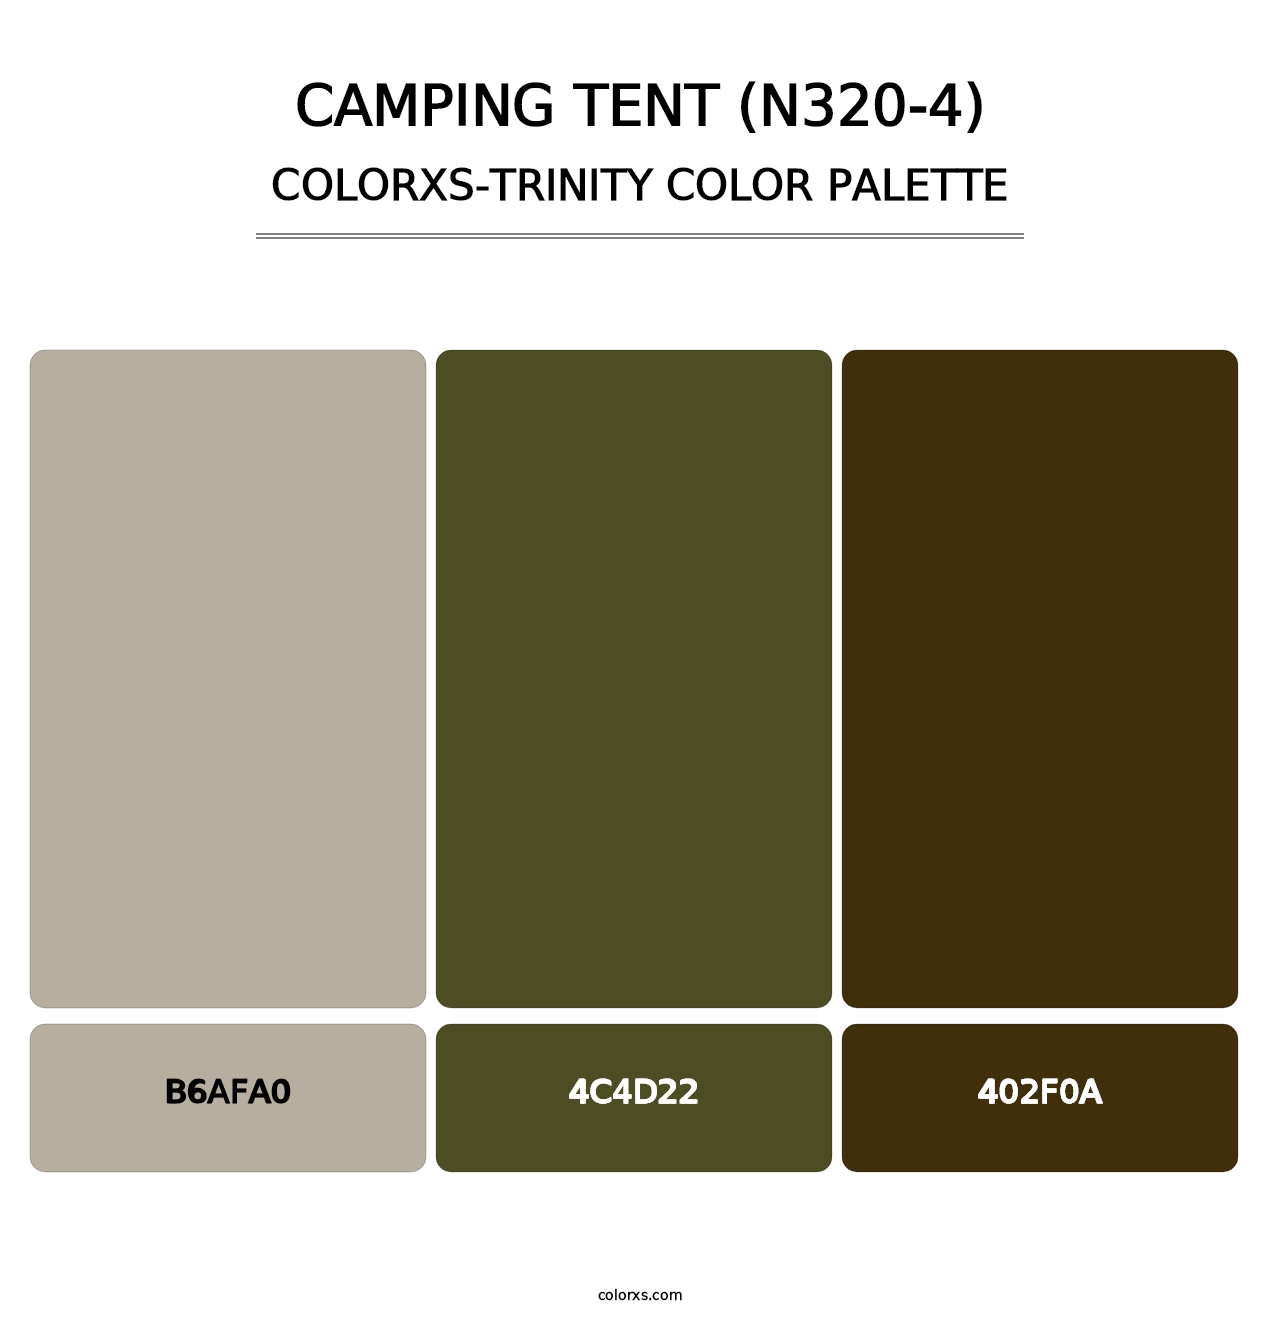 Camping Tent (N320-4) - Colorxs Trinity Palette